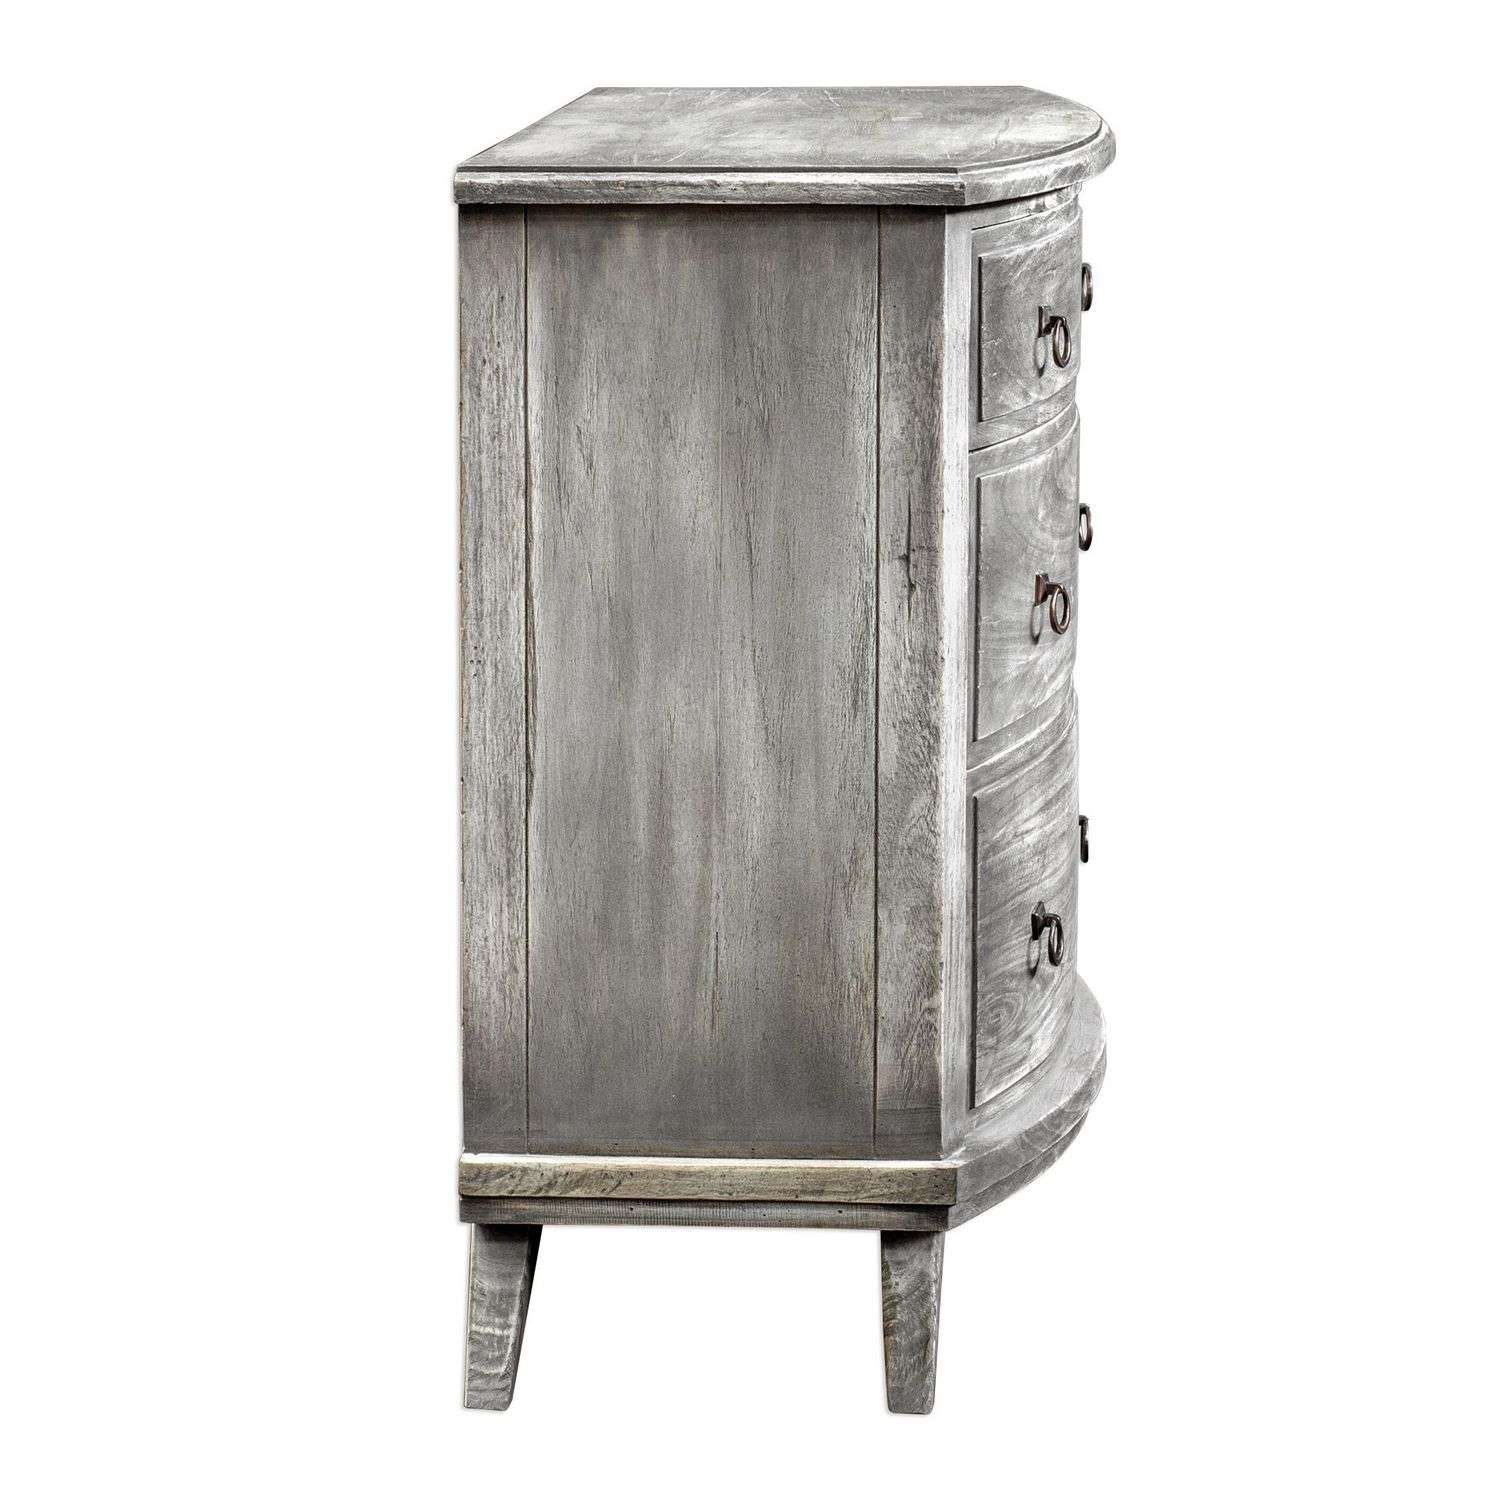 Uttermost Jacoby Accent Chest - Driftwood